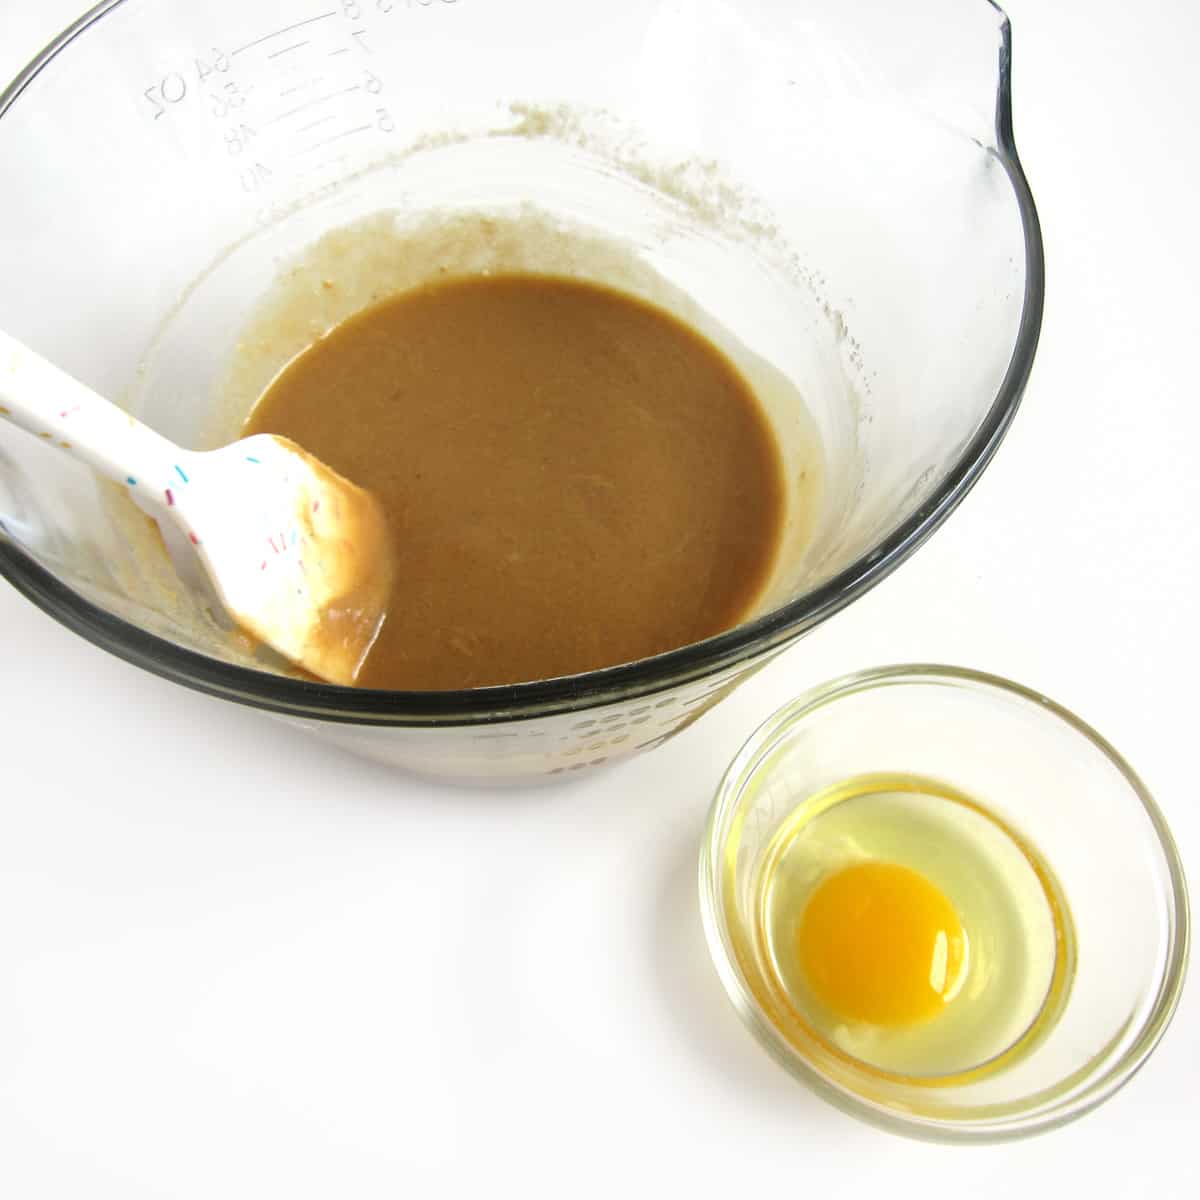 butter, brown sugar, granulated sugar, and peanut butter mixed together in a mixing bowl next to a cracked egg in a bowl.